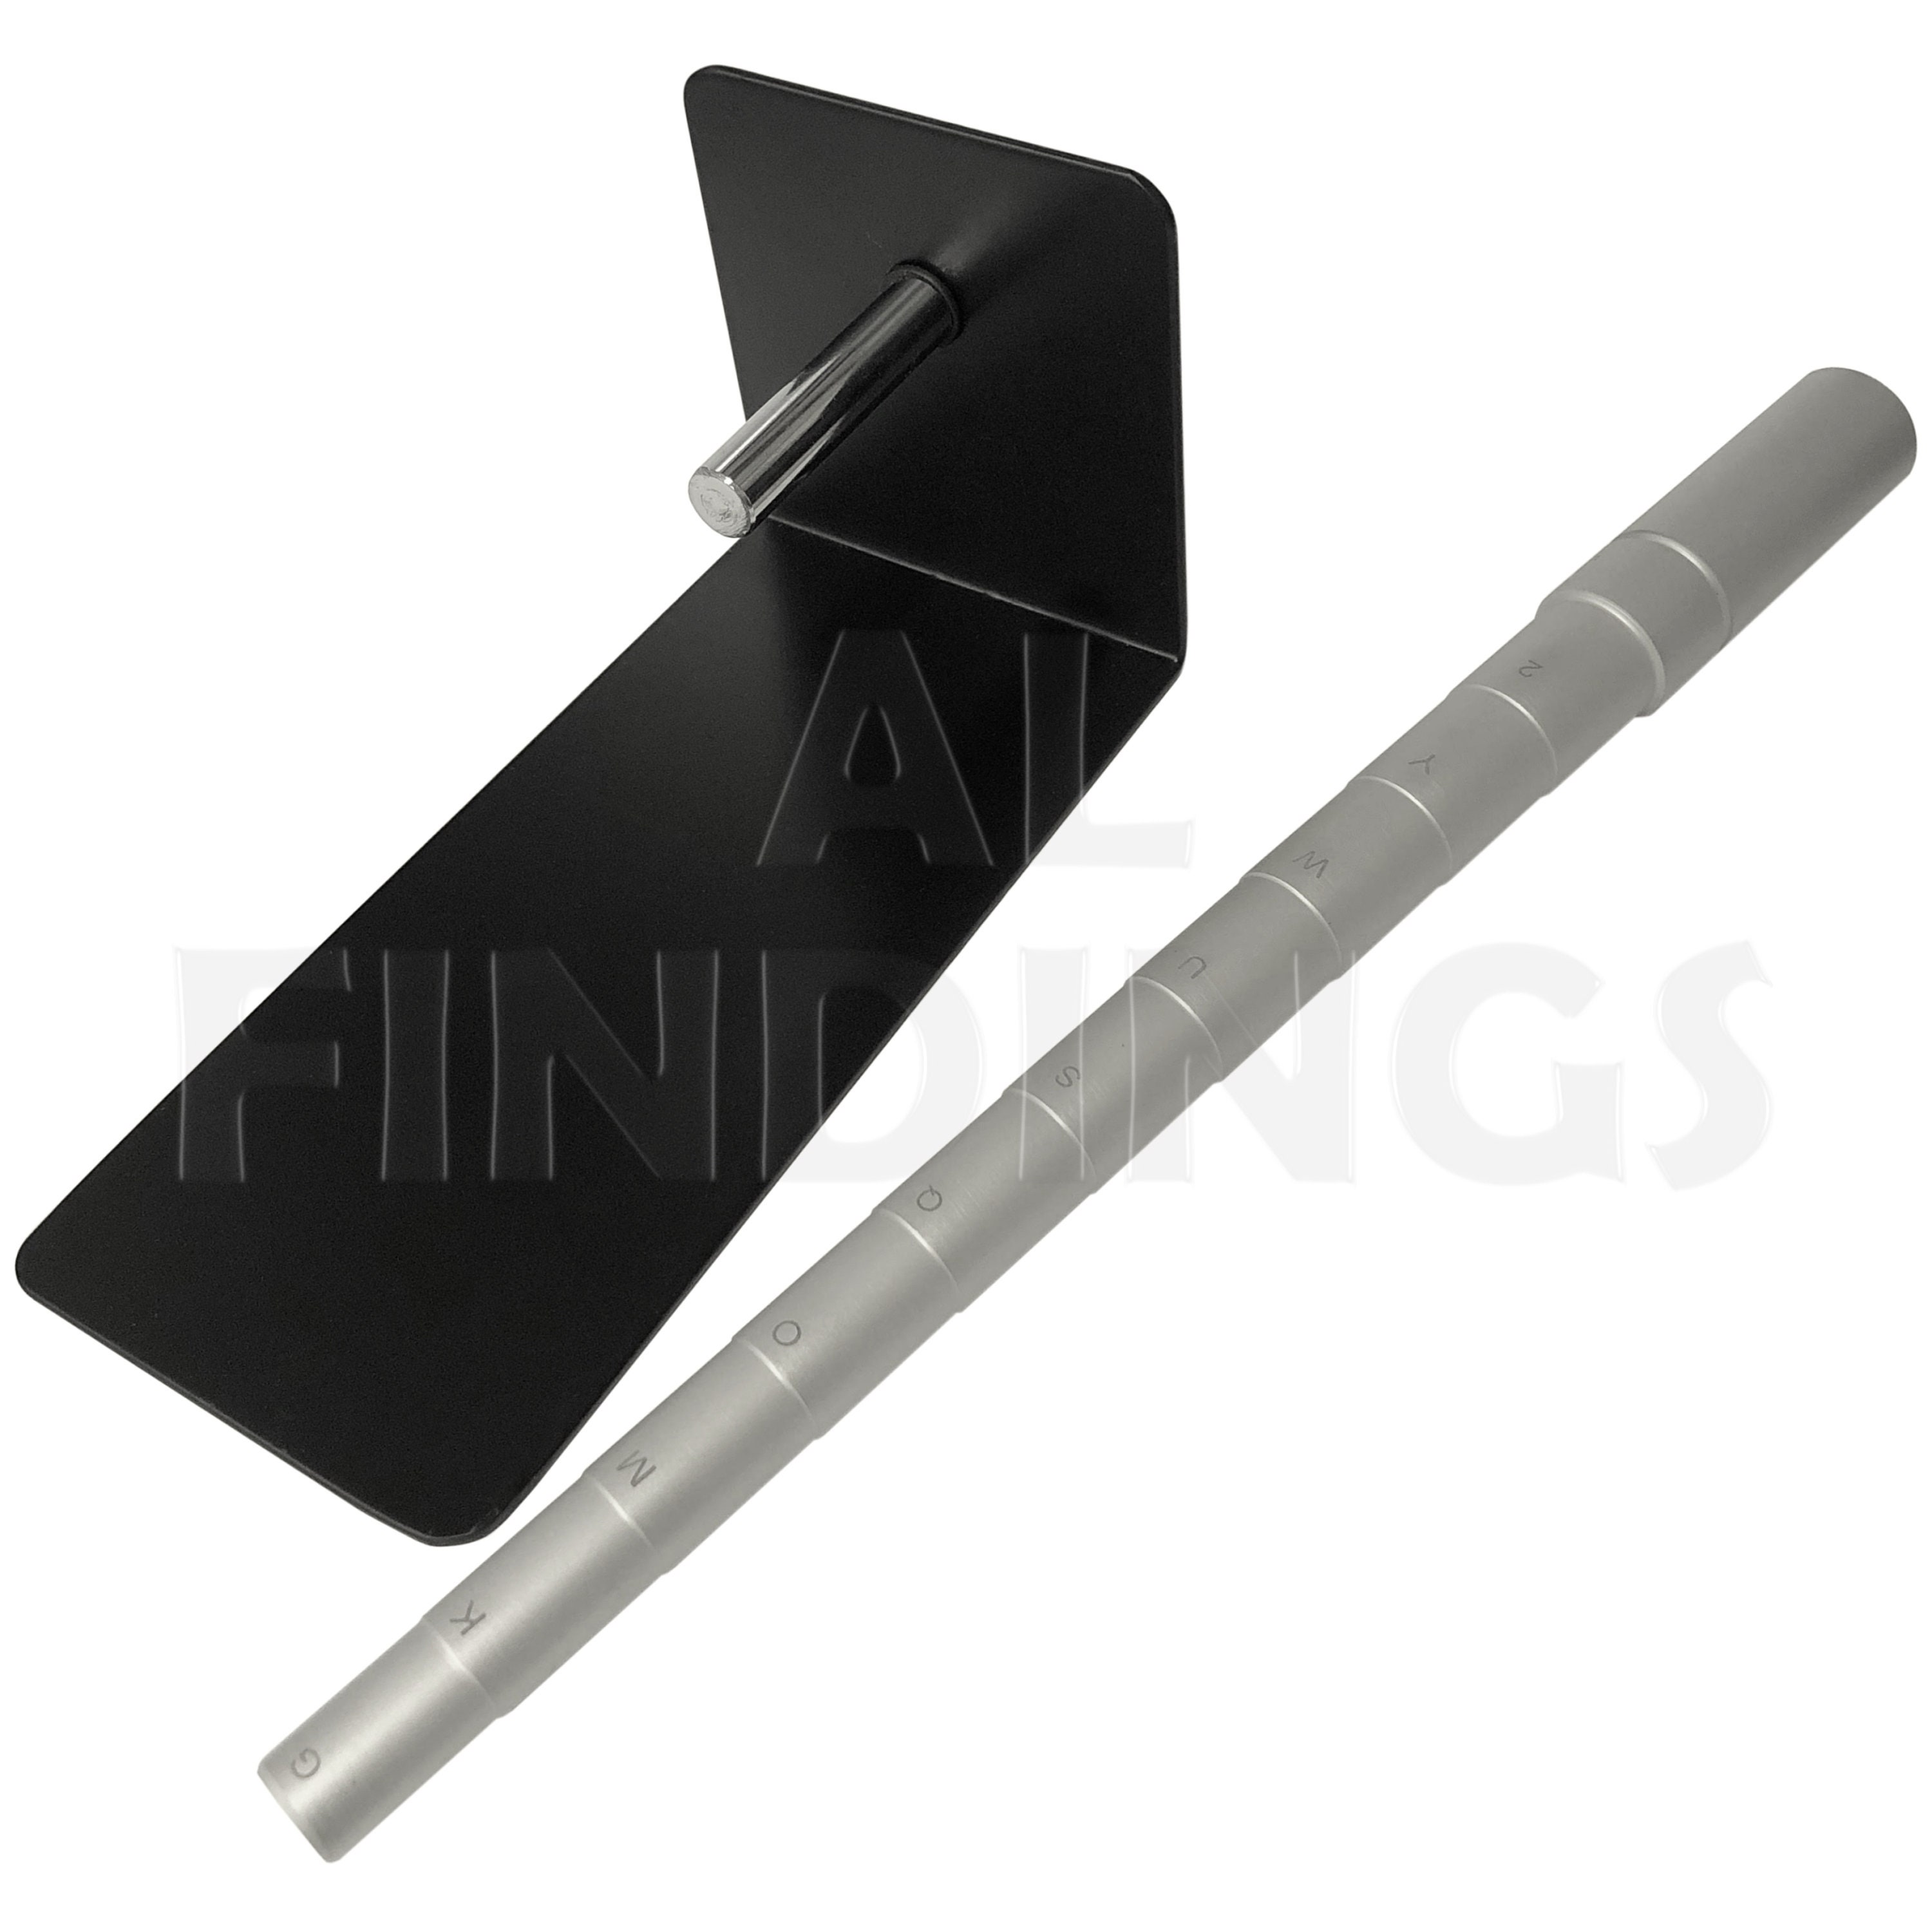 Ring Crafters Ring Mandrel 2 PC Set - Sizes 4-13